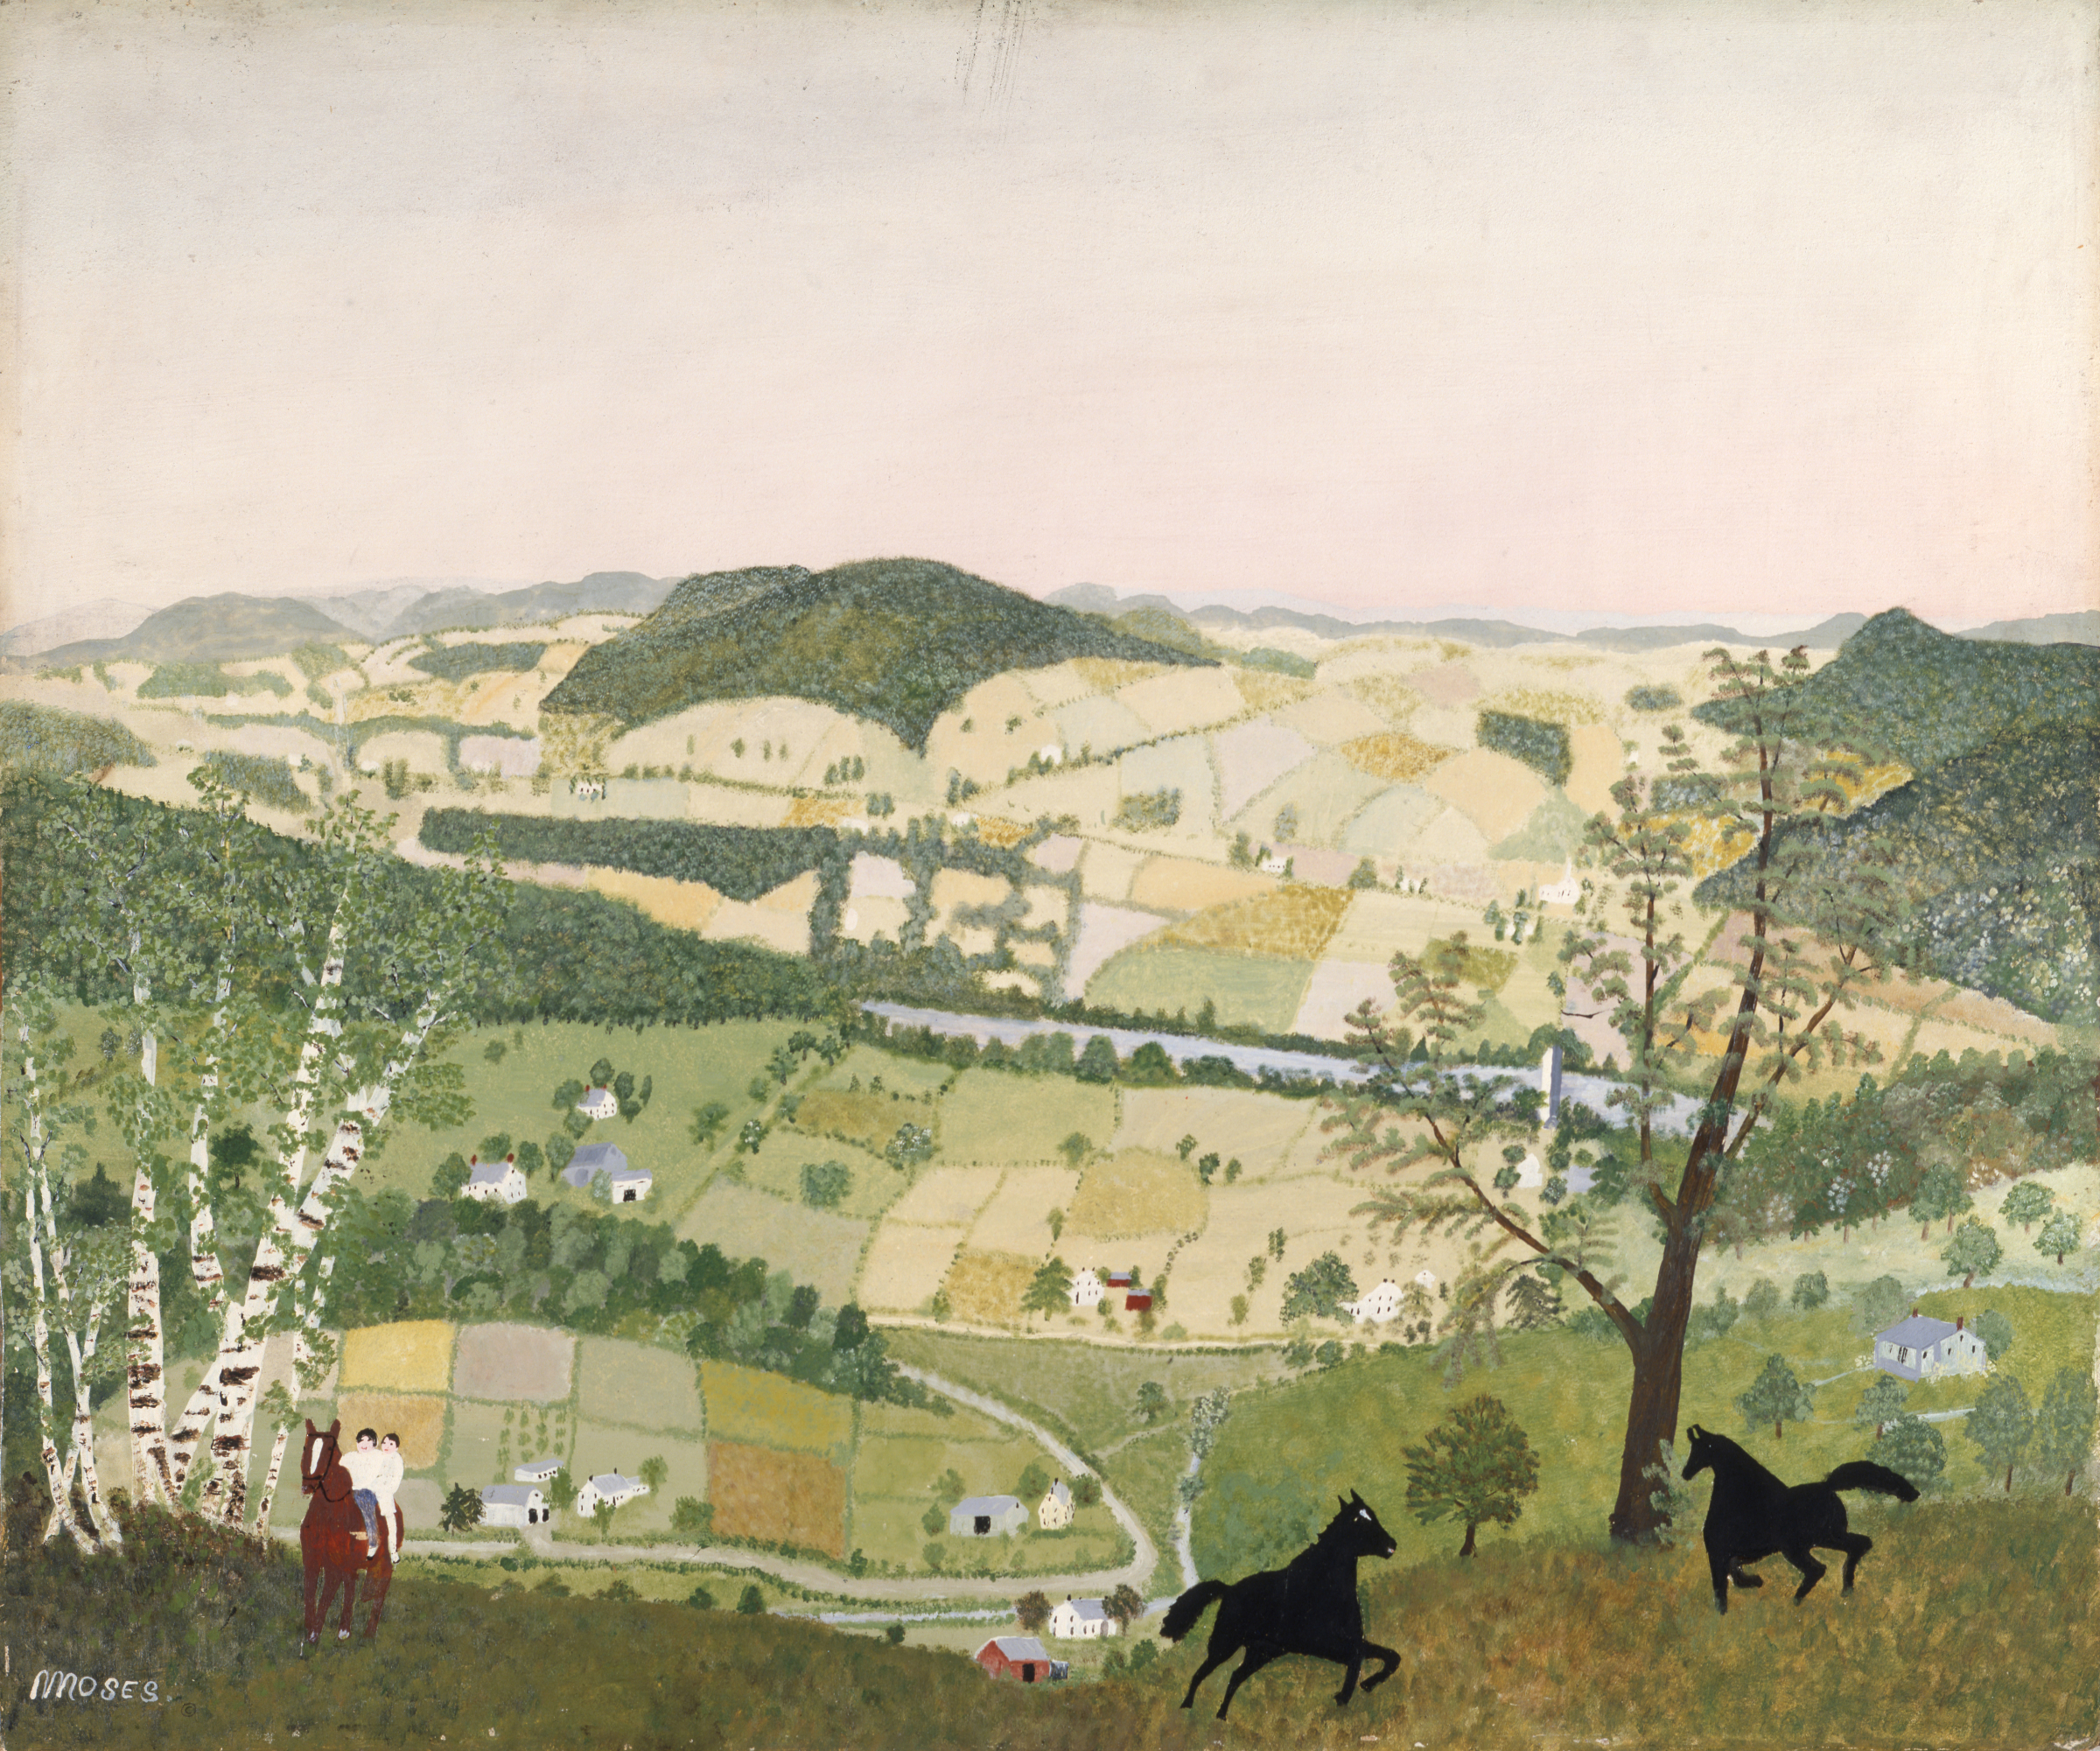 This is a painting by Grandma Moses of a green countryside with hills, horses, and civilians.